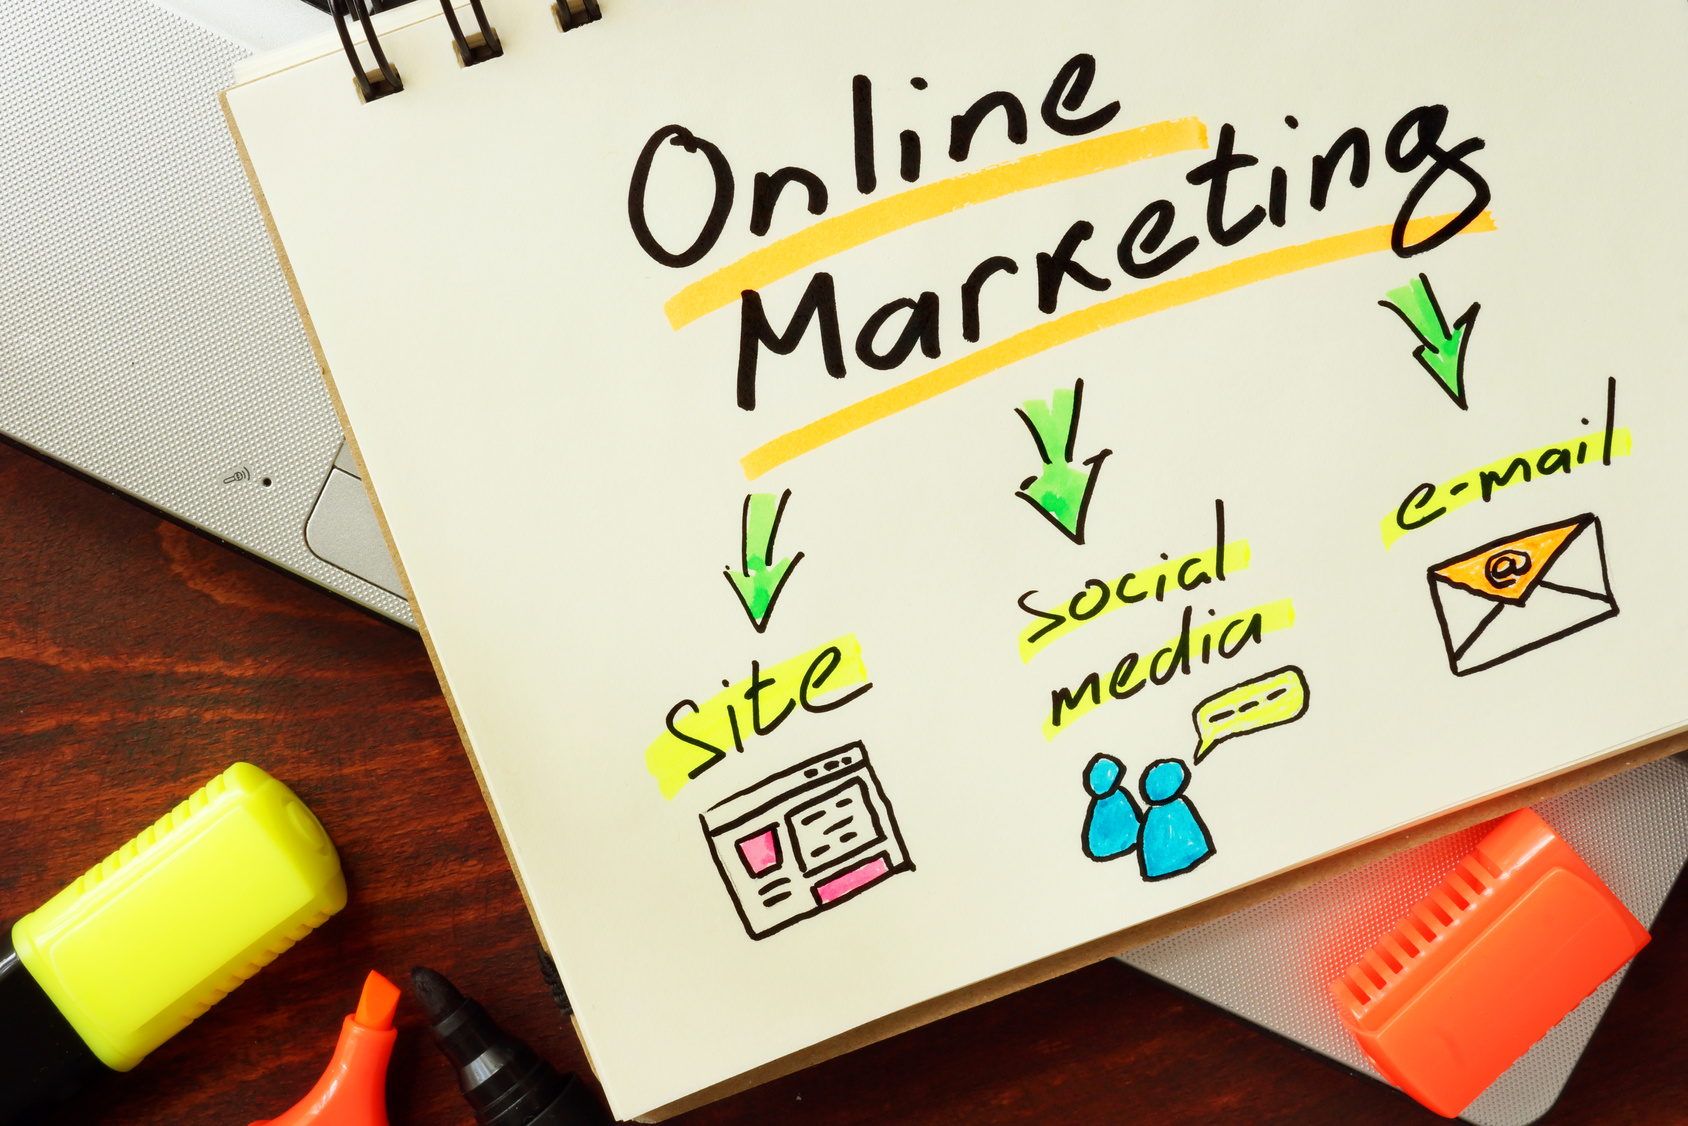 The Numbers Show Internet Marketing Is for Real